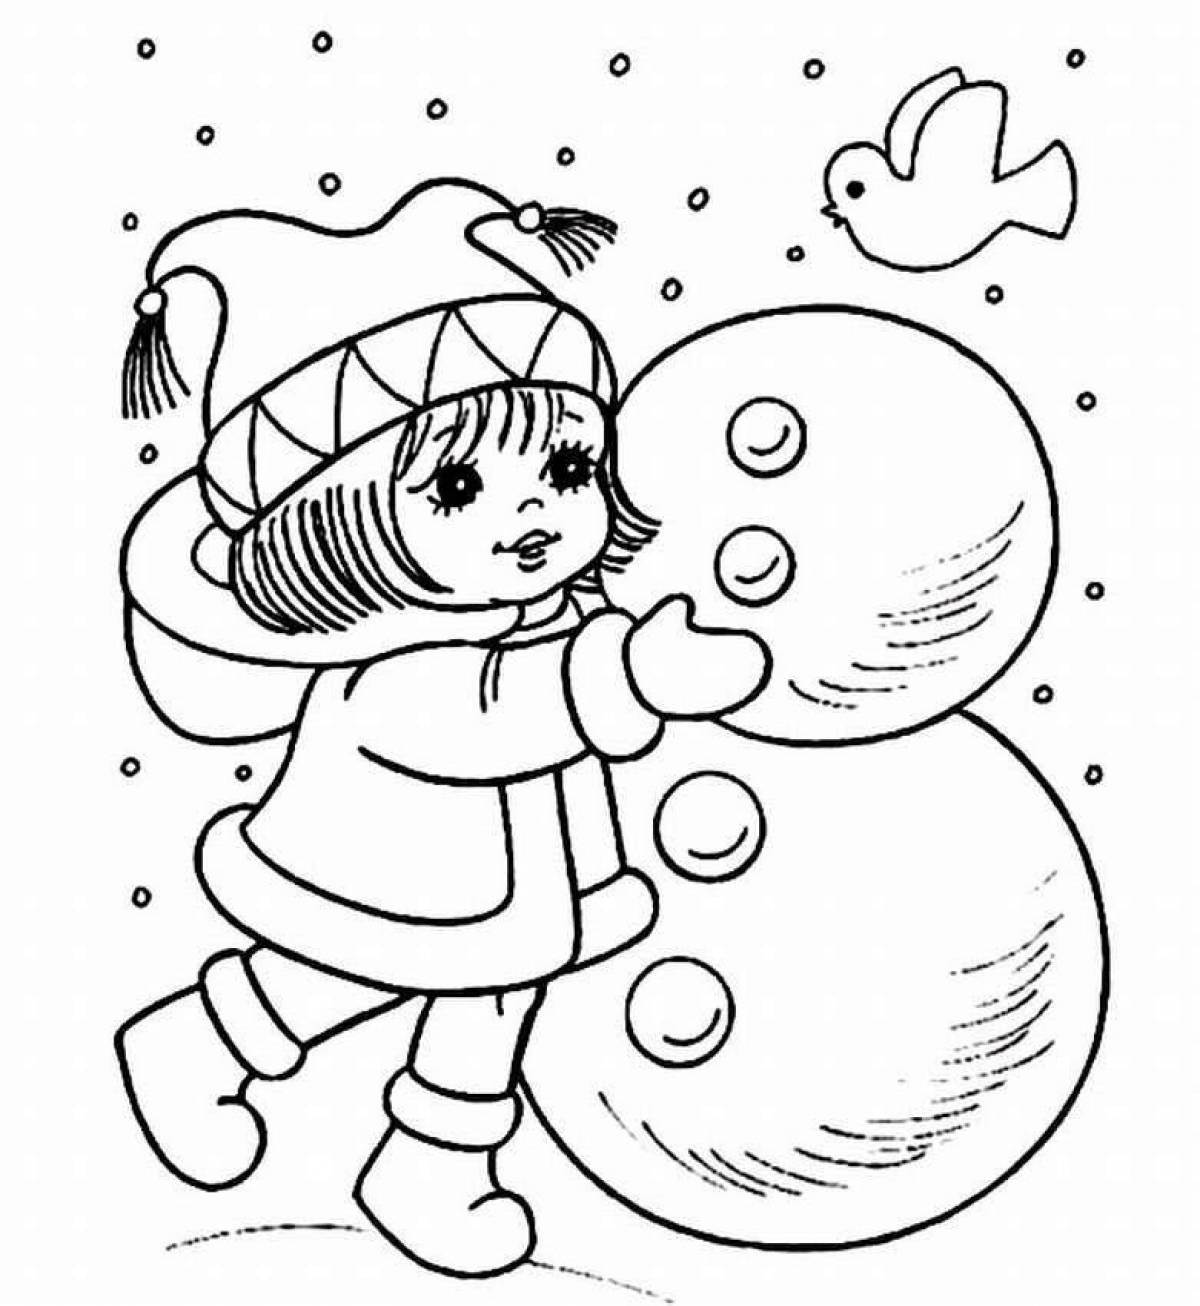 Rampant winter coloring book for 3-4 year olds